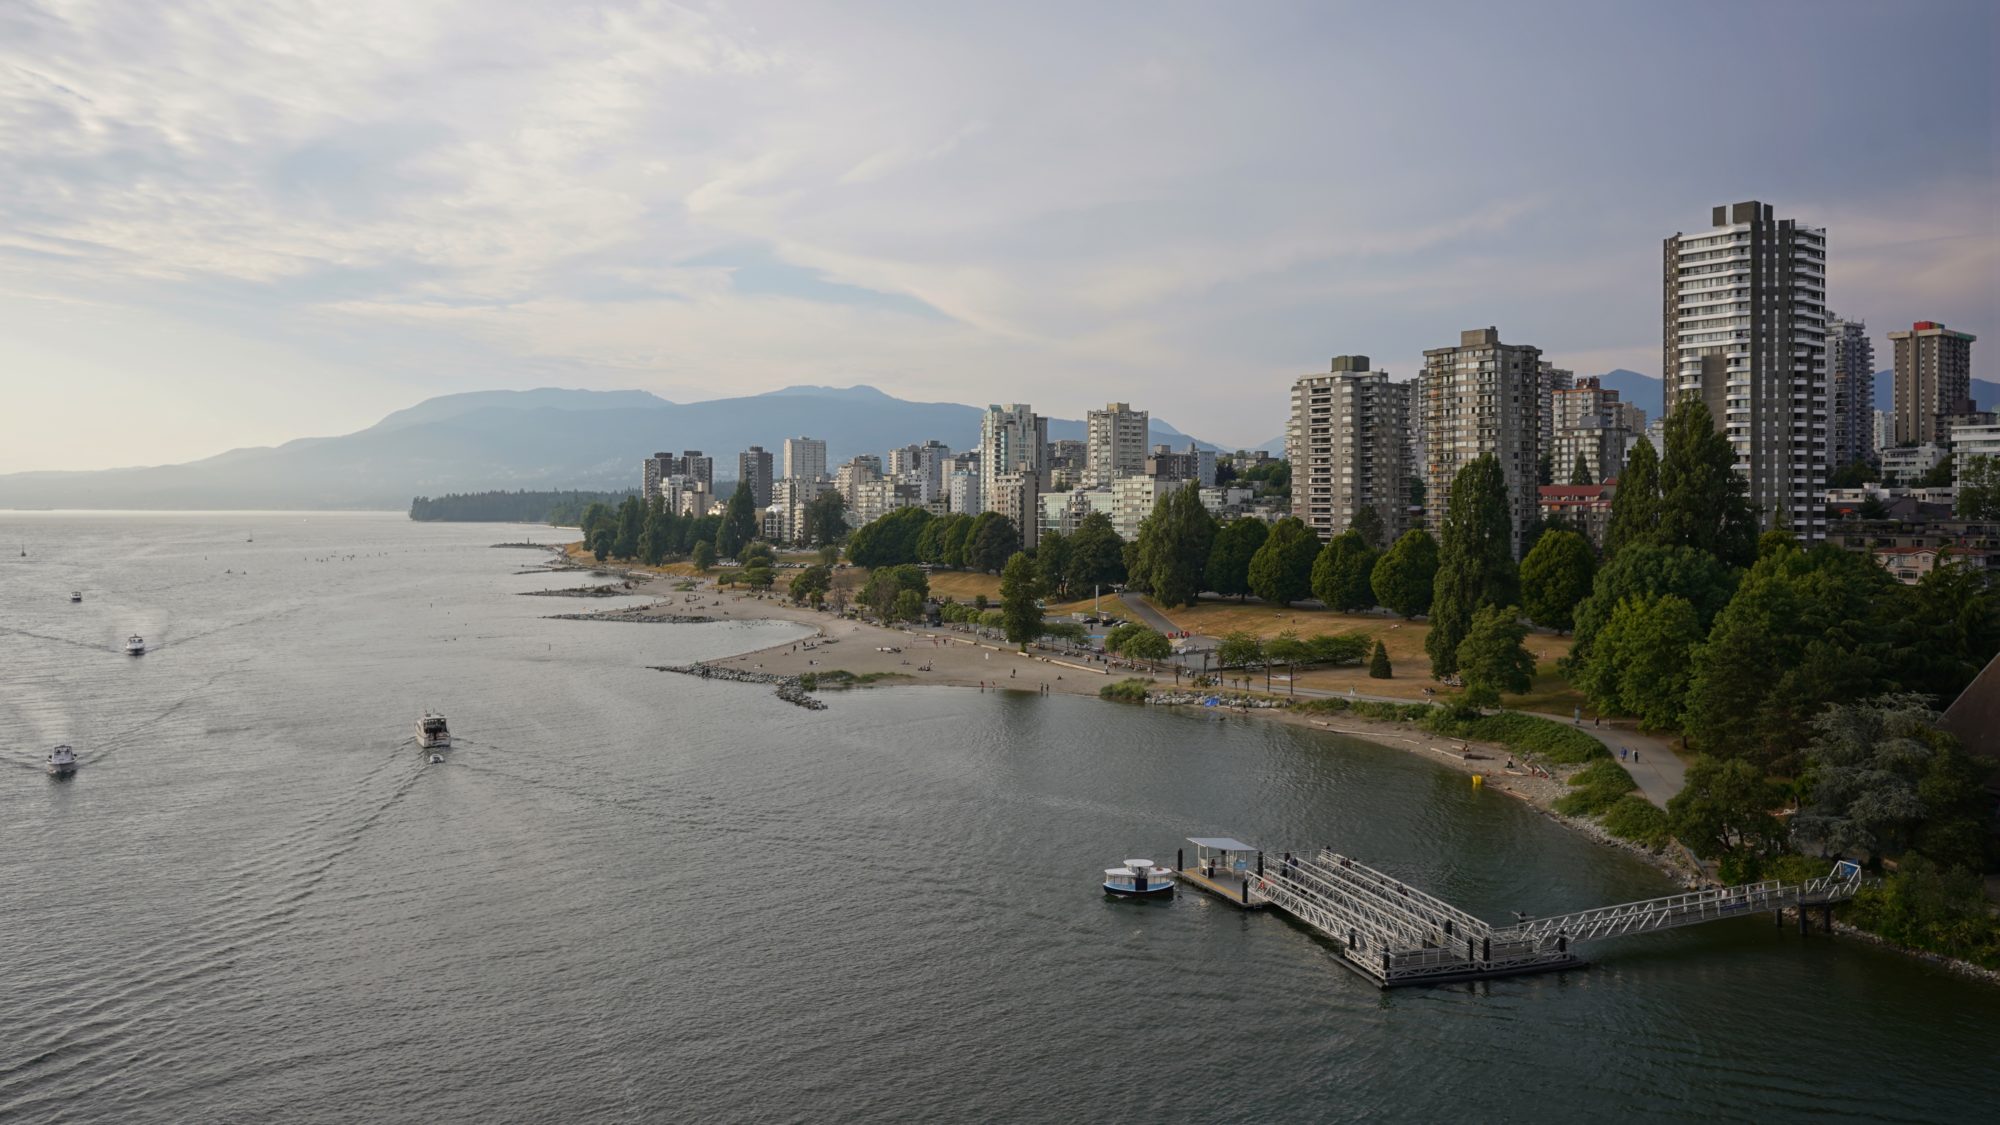 A view of the West End towers and Sunset Beach from Burrard Bridge. There are wispy clouds in the sky, and the light is fading